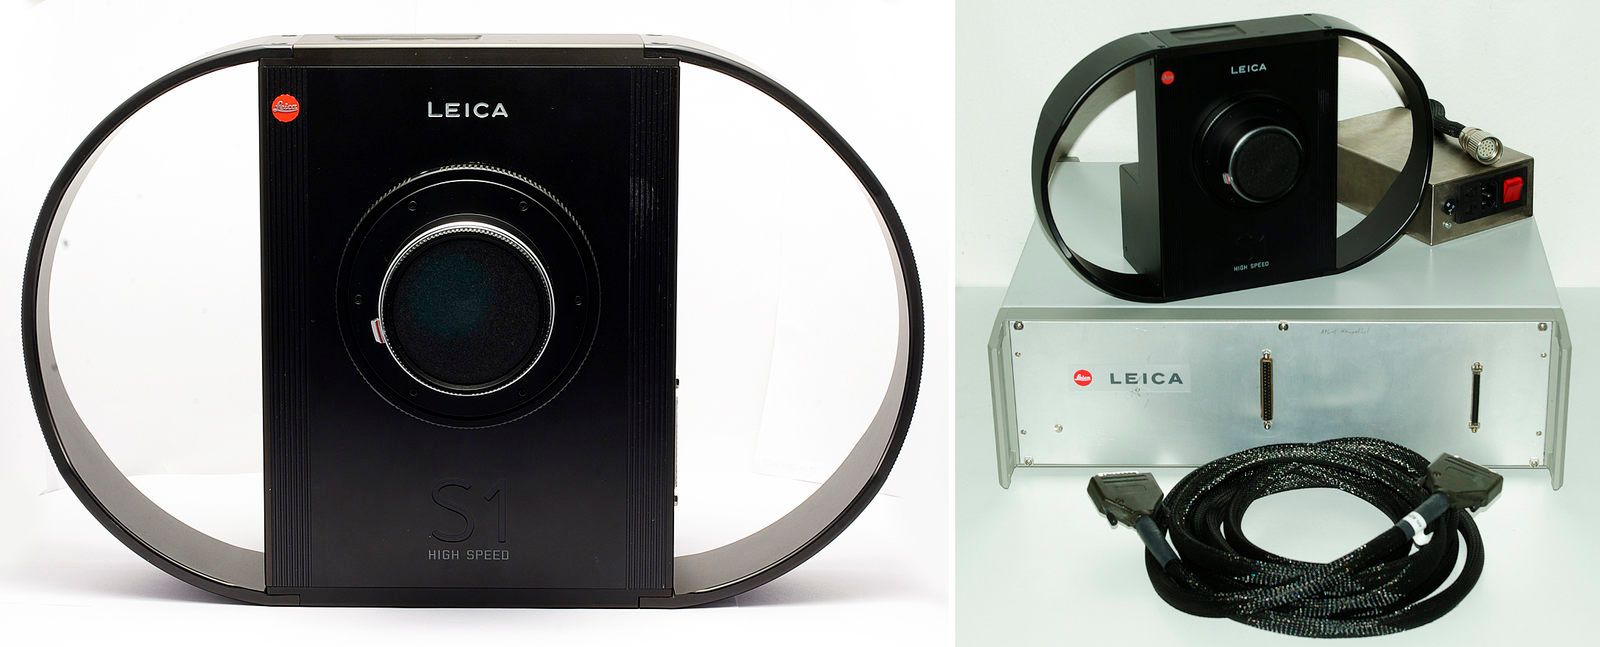 The most unusual cameras ever made image 5